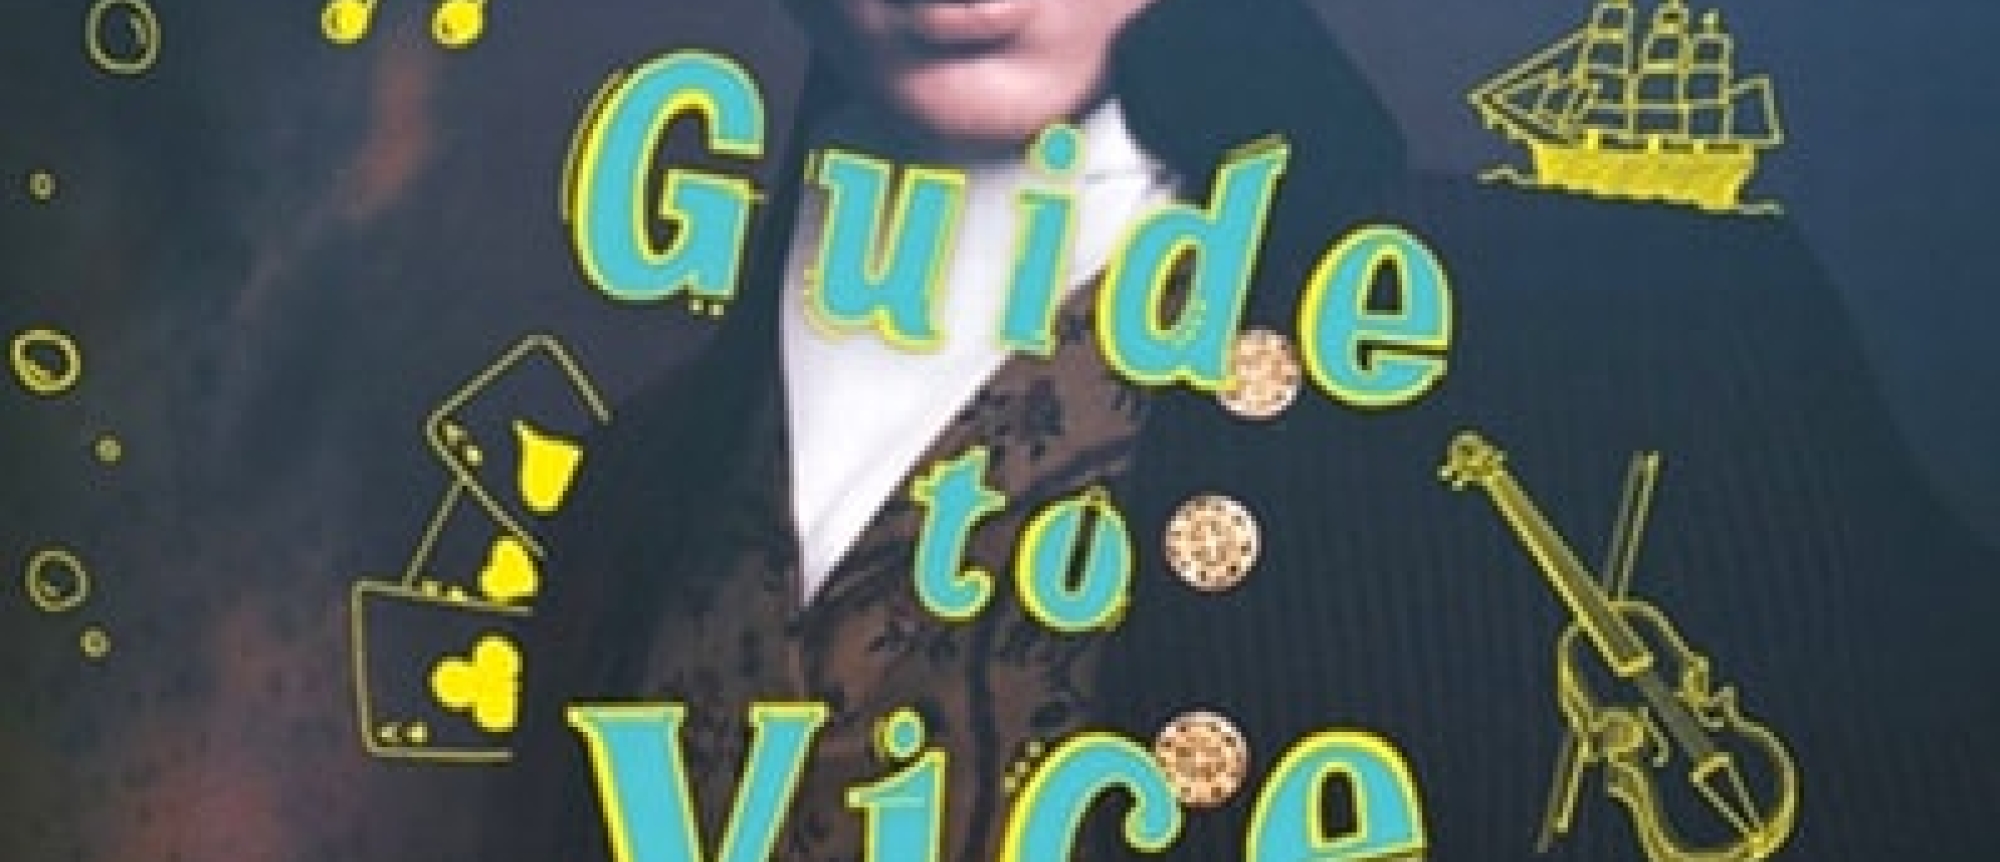 YA Book Club #42: The Gentleman's Guide to Vice and Virtue